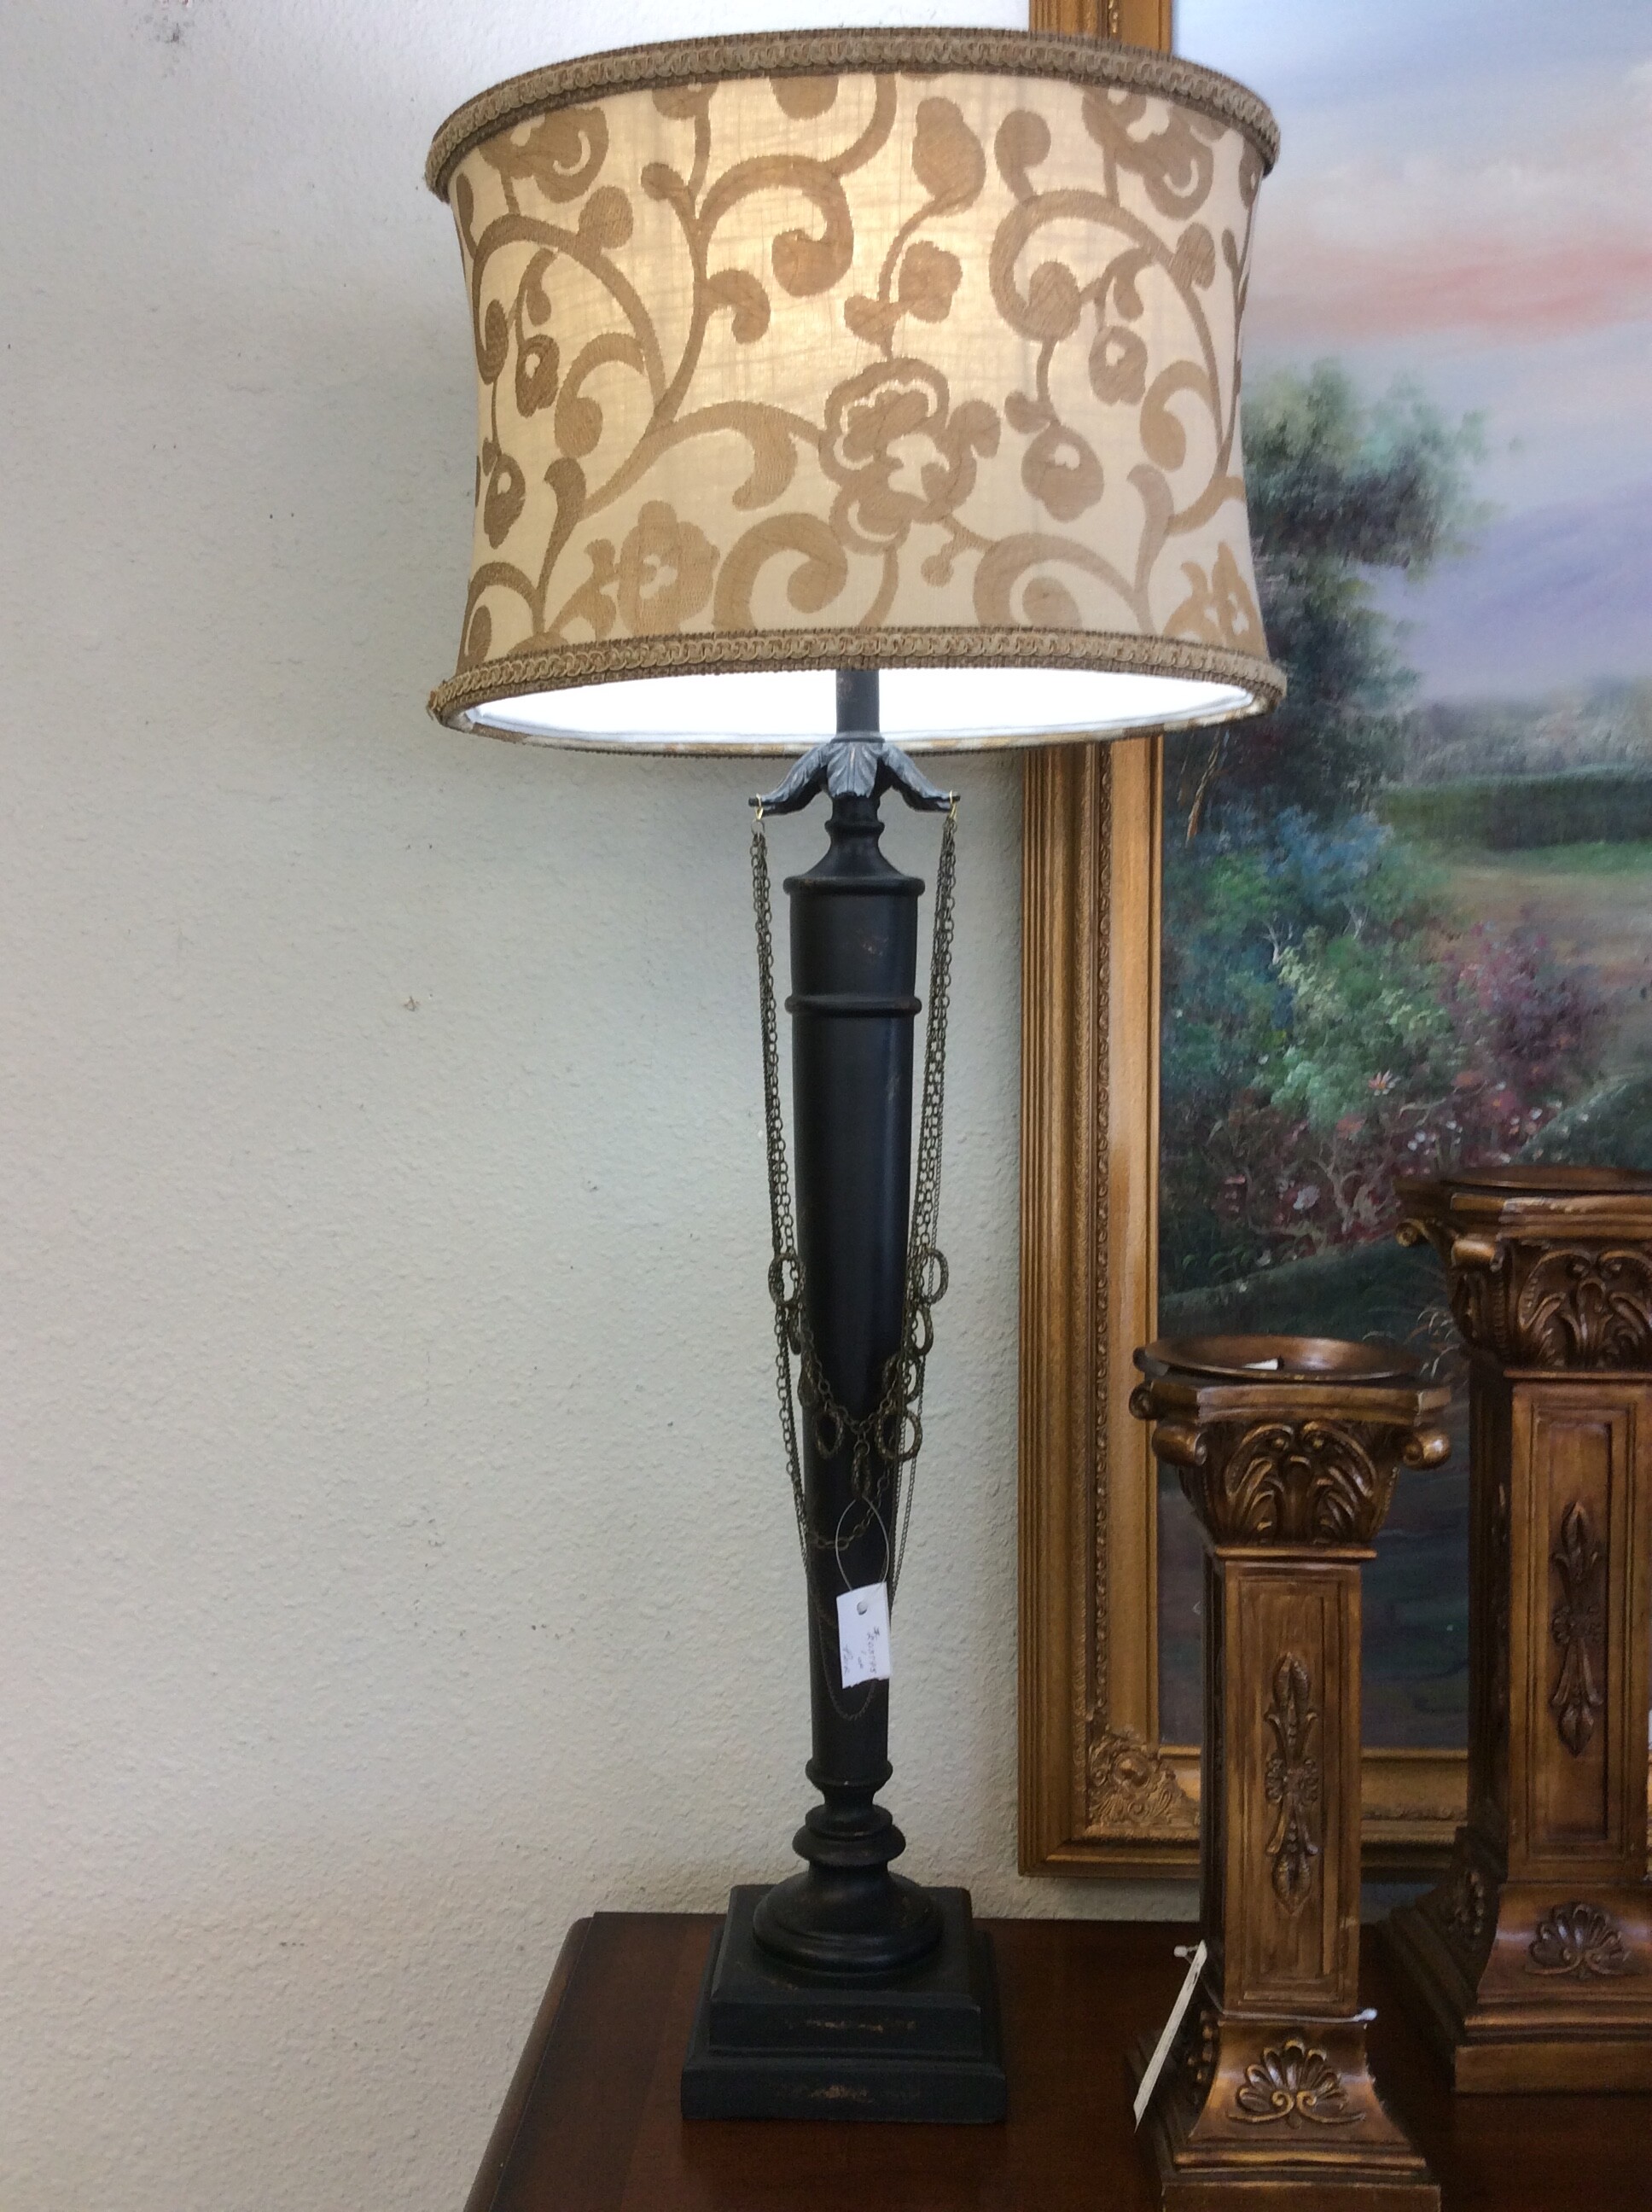 These Tall Buffett Lamps are a beautiful distressed dark stained wood. They have a unique bronze necklace type chain haning down in front and pretty cream & tan shades.